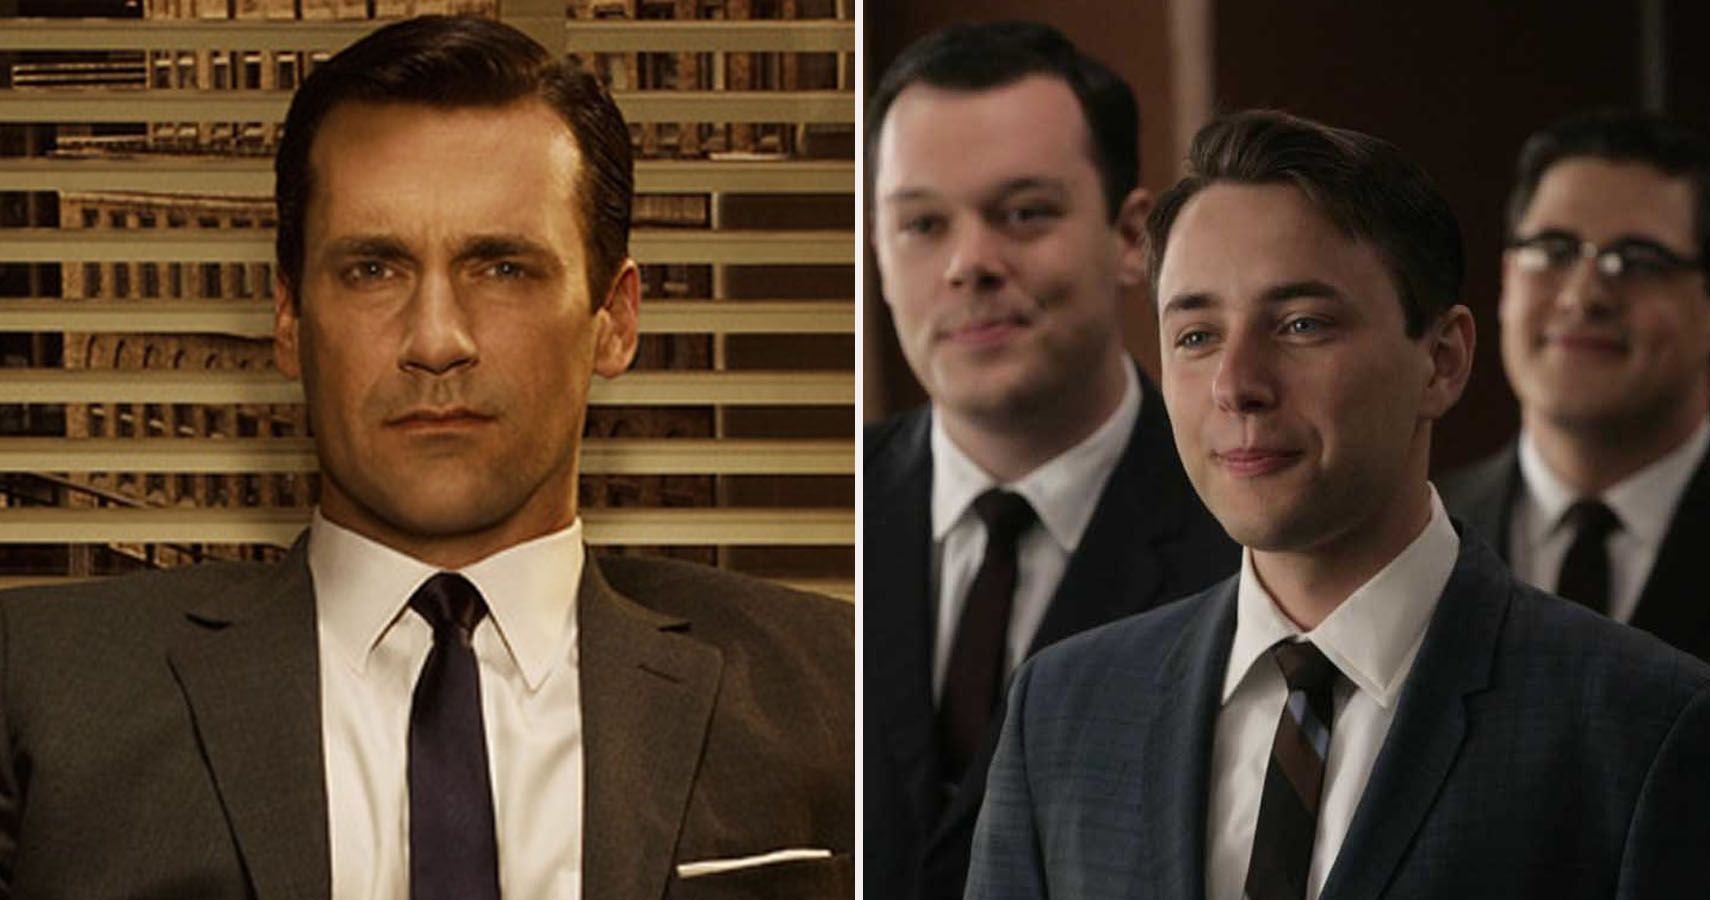 10 Hysterical Mad Men Memes Only True Fans Understand